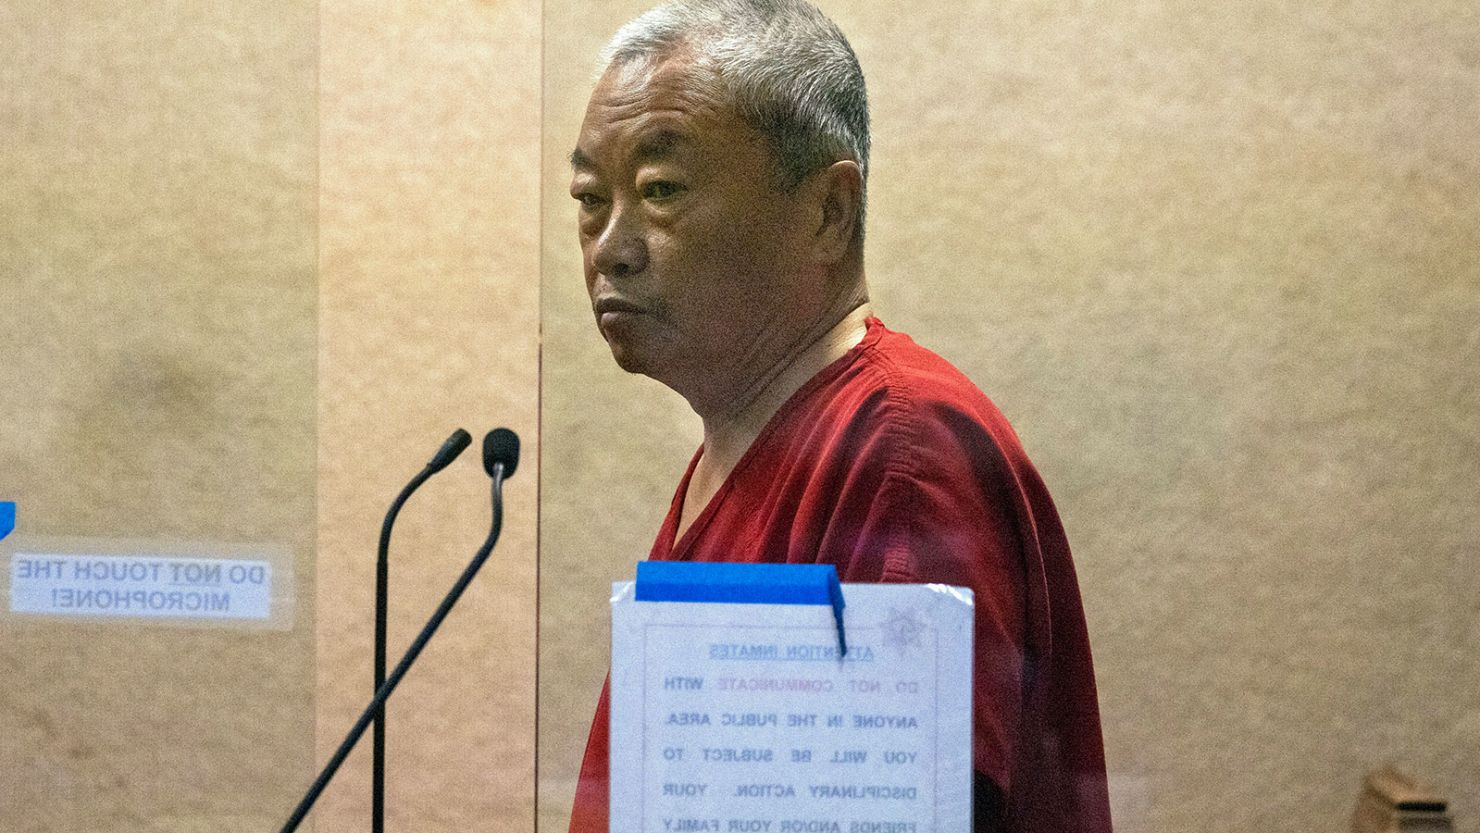 Chunli Zhao appeared for his initial arraignment at San Mateo Superior Court in Redwood City, California, on January 25, 2023.